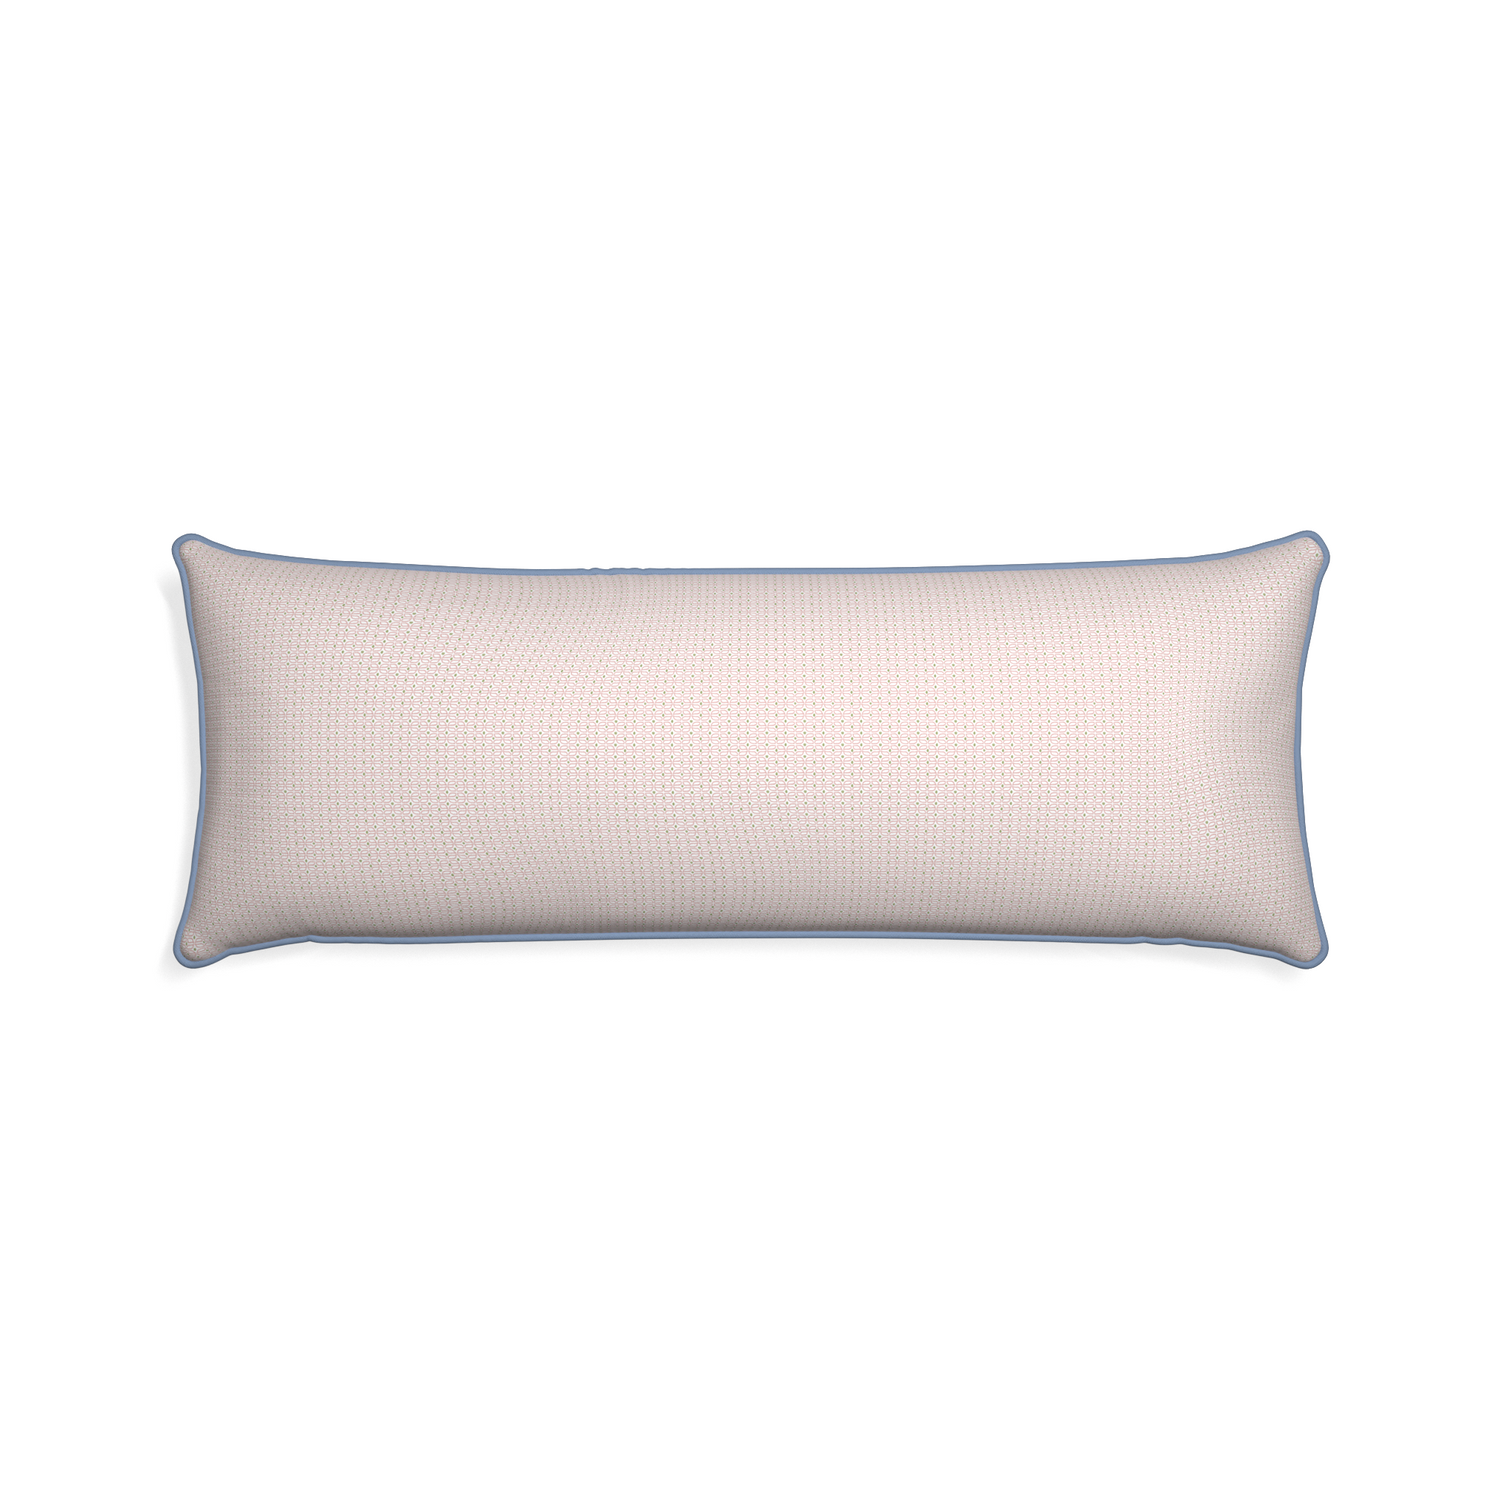 Xl-lumbar loomi pink custom pink geometricpillow with sky piping on white background